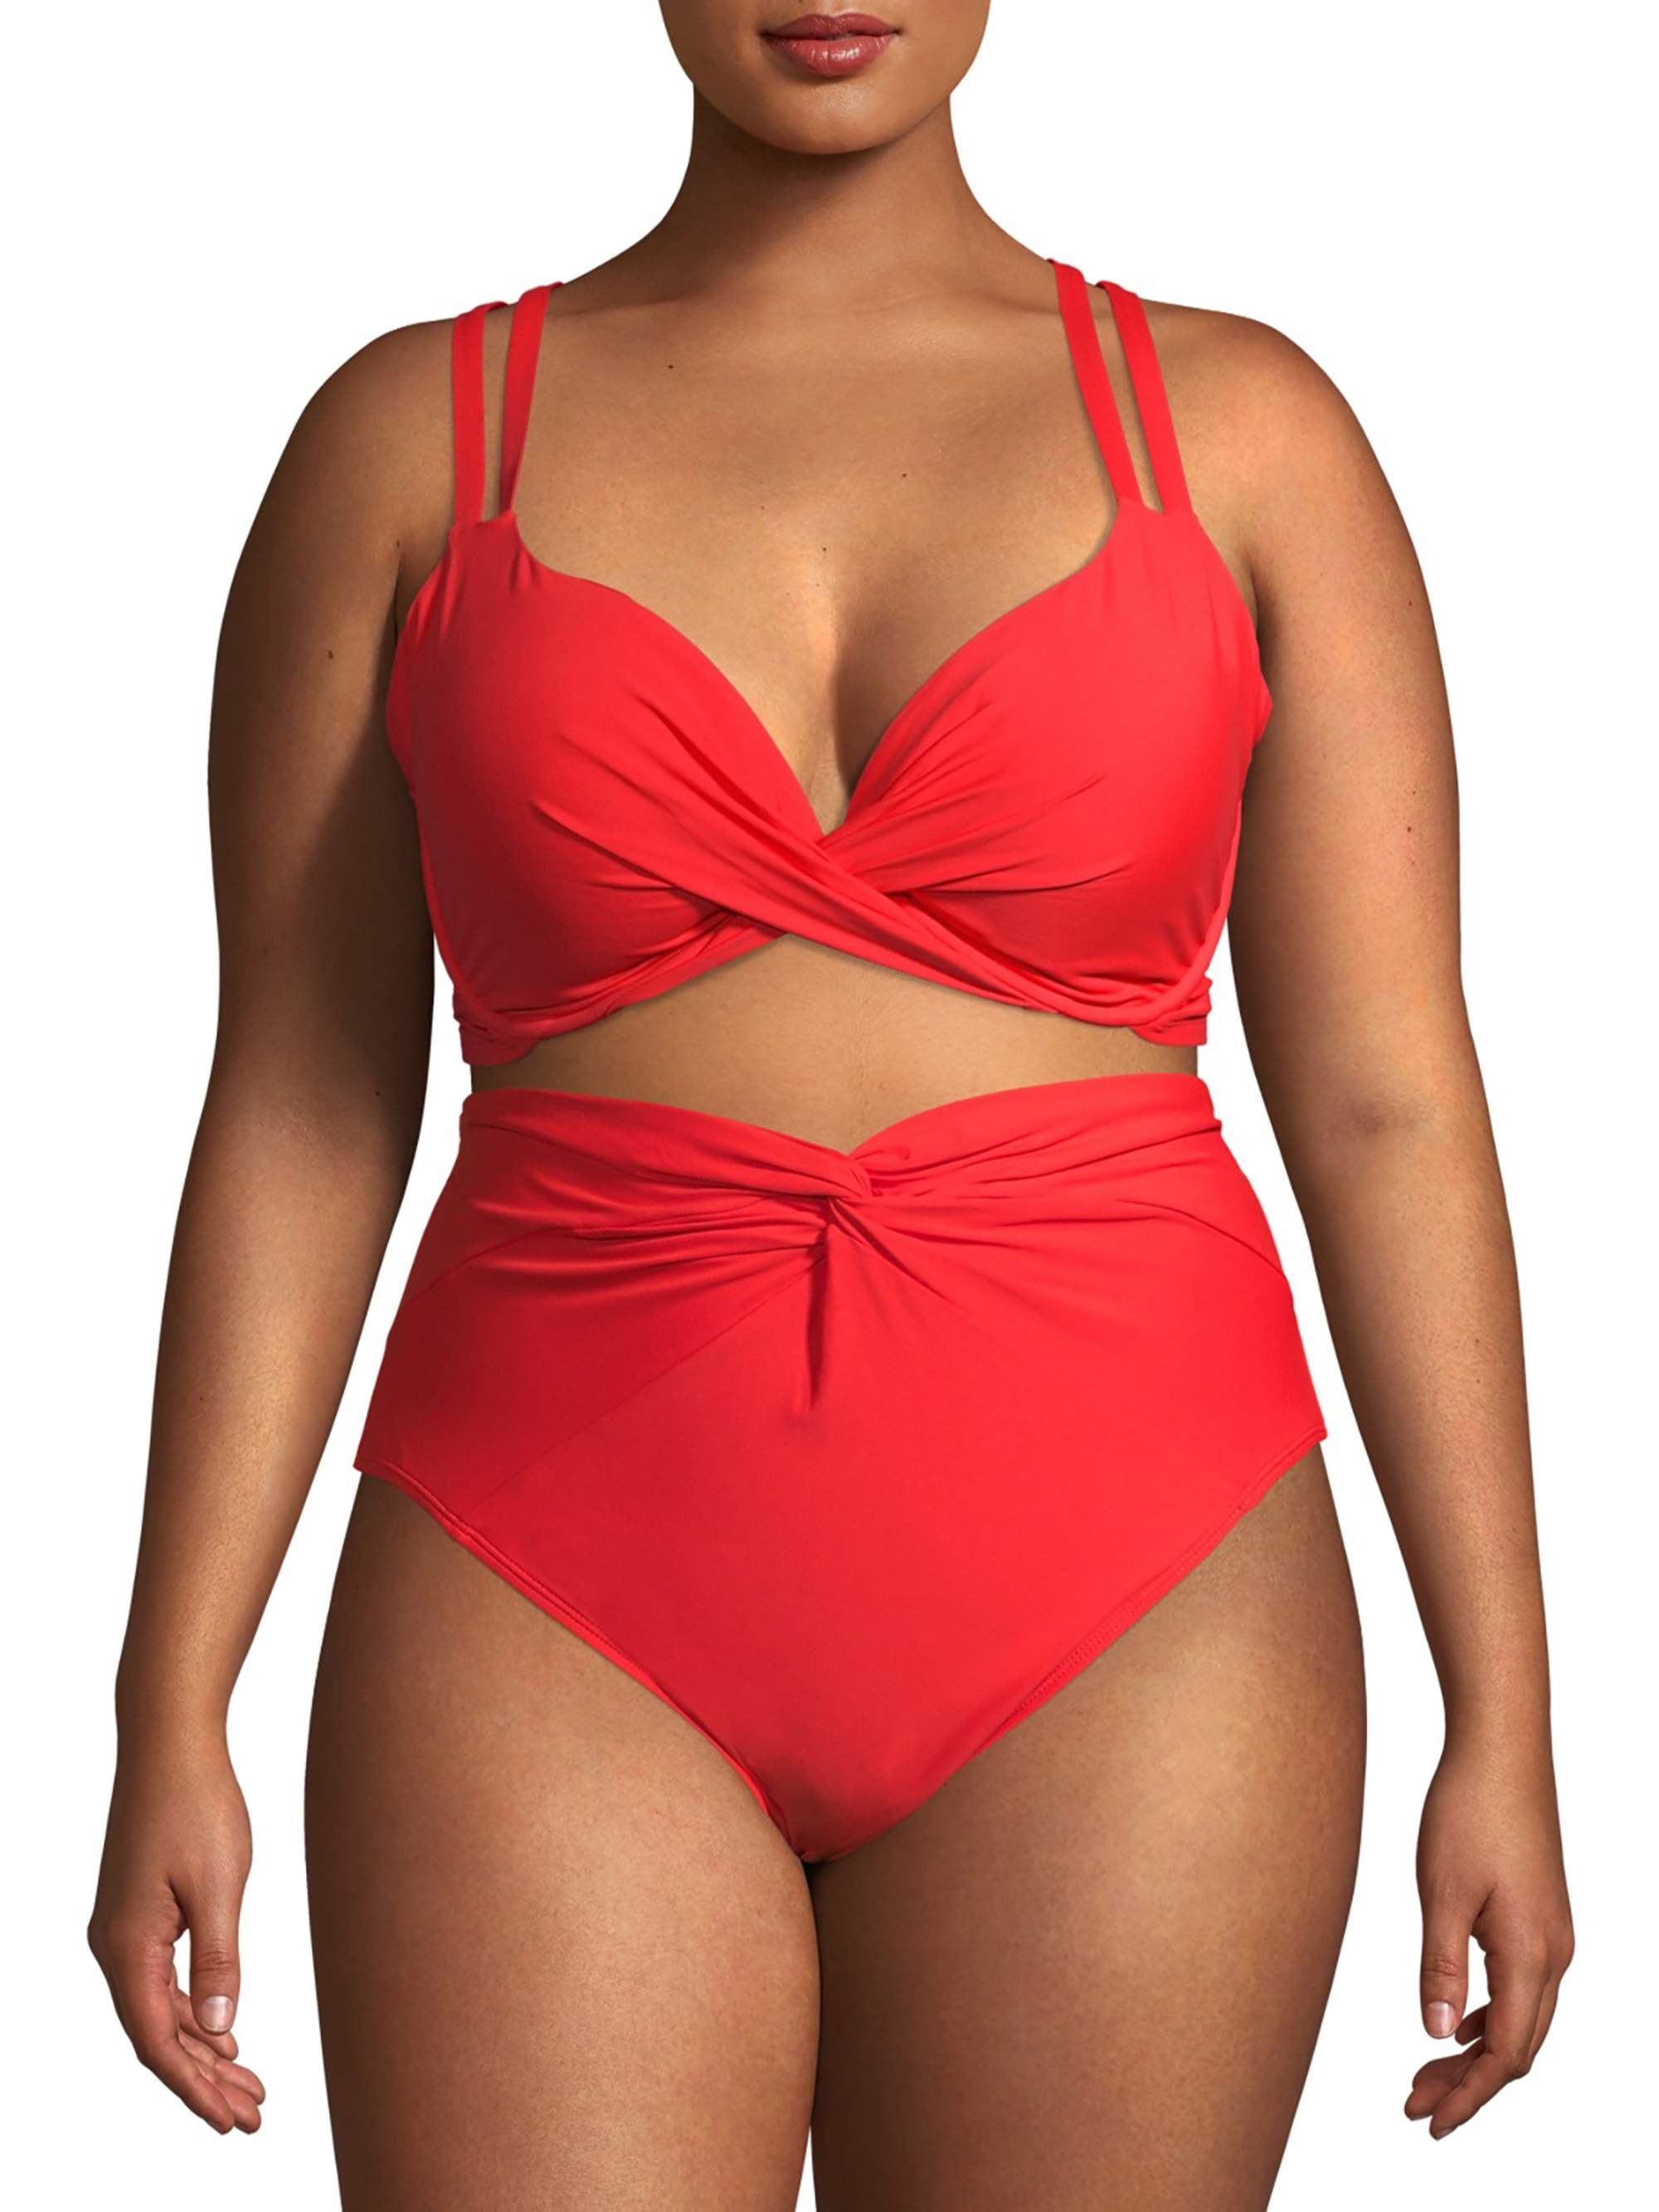 Modtager Kristendom En begivenhed Time and Tru Women's and Women's Plus Red Twist Front Solid Swimsuit Top -  Walmart.com